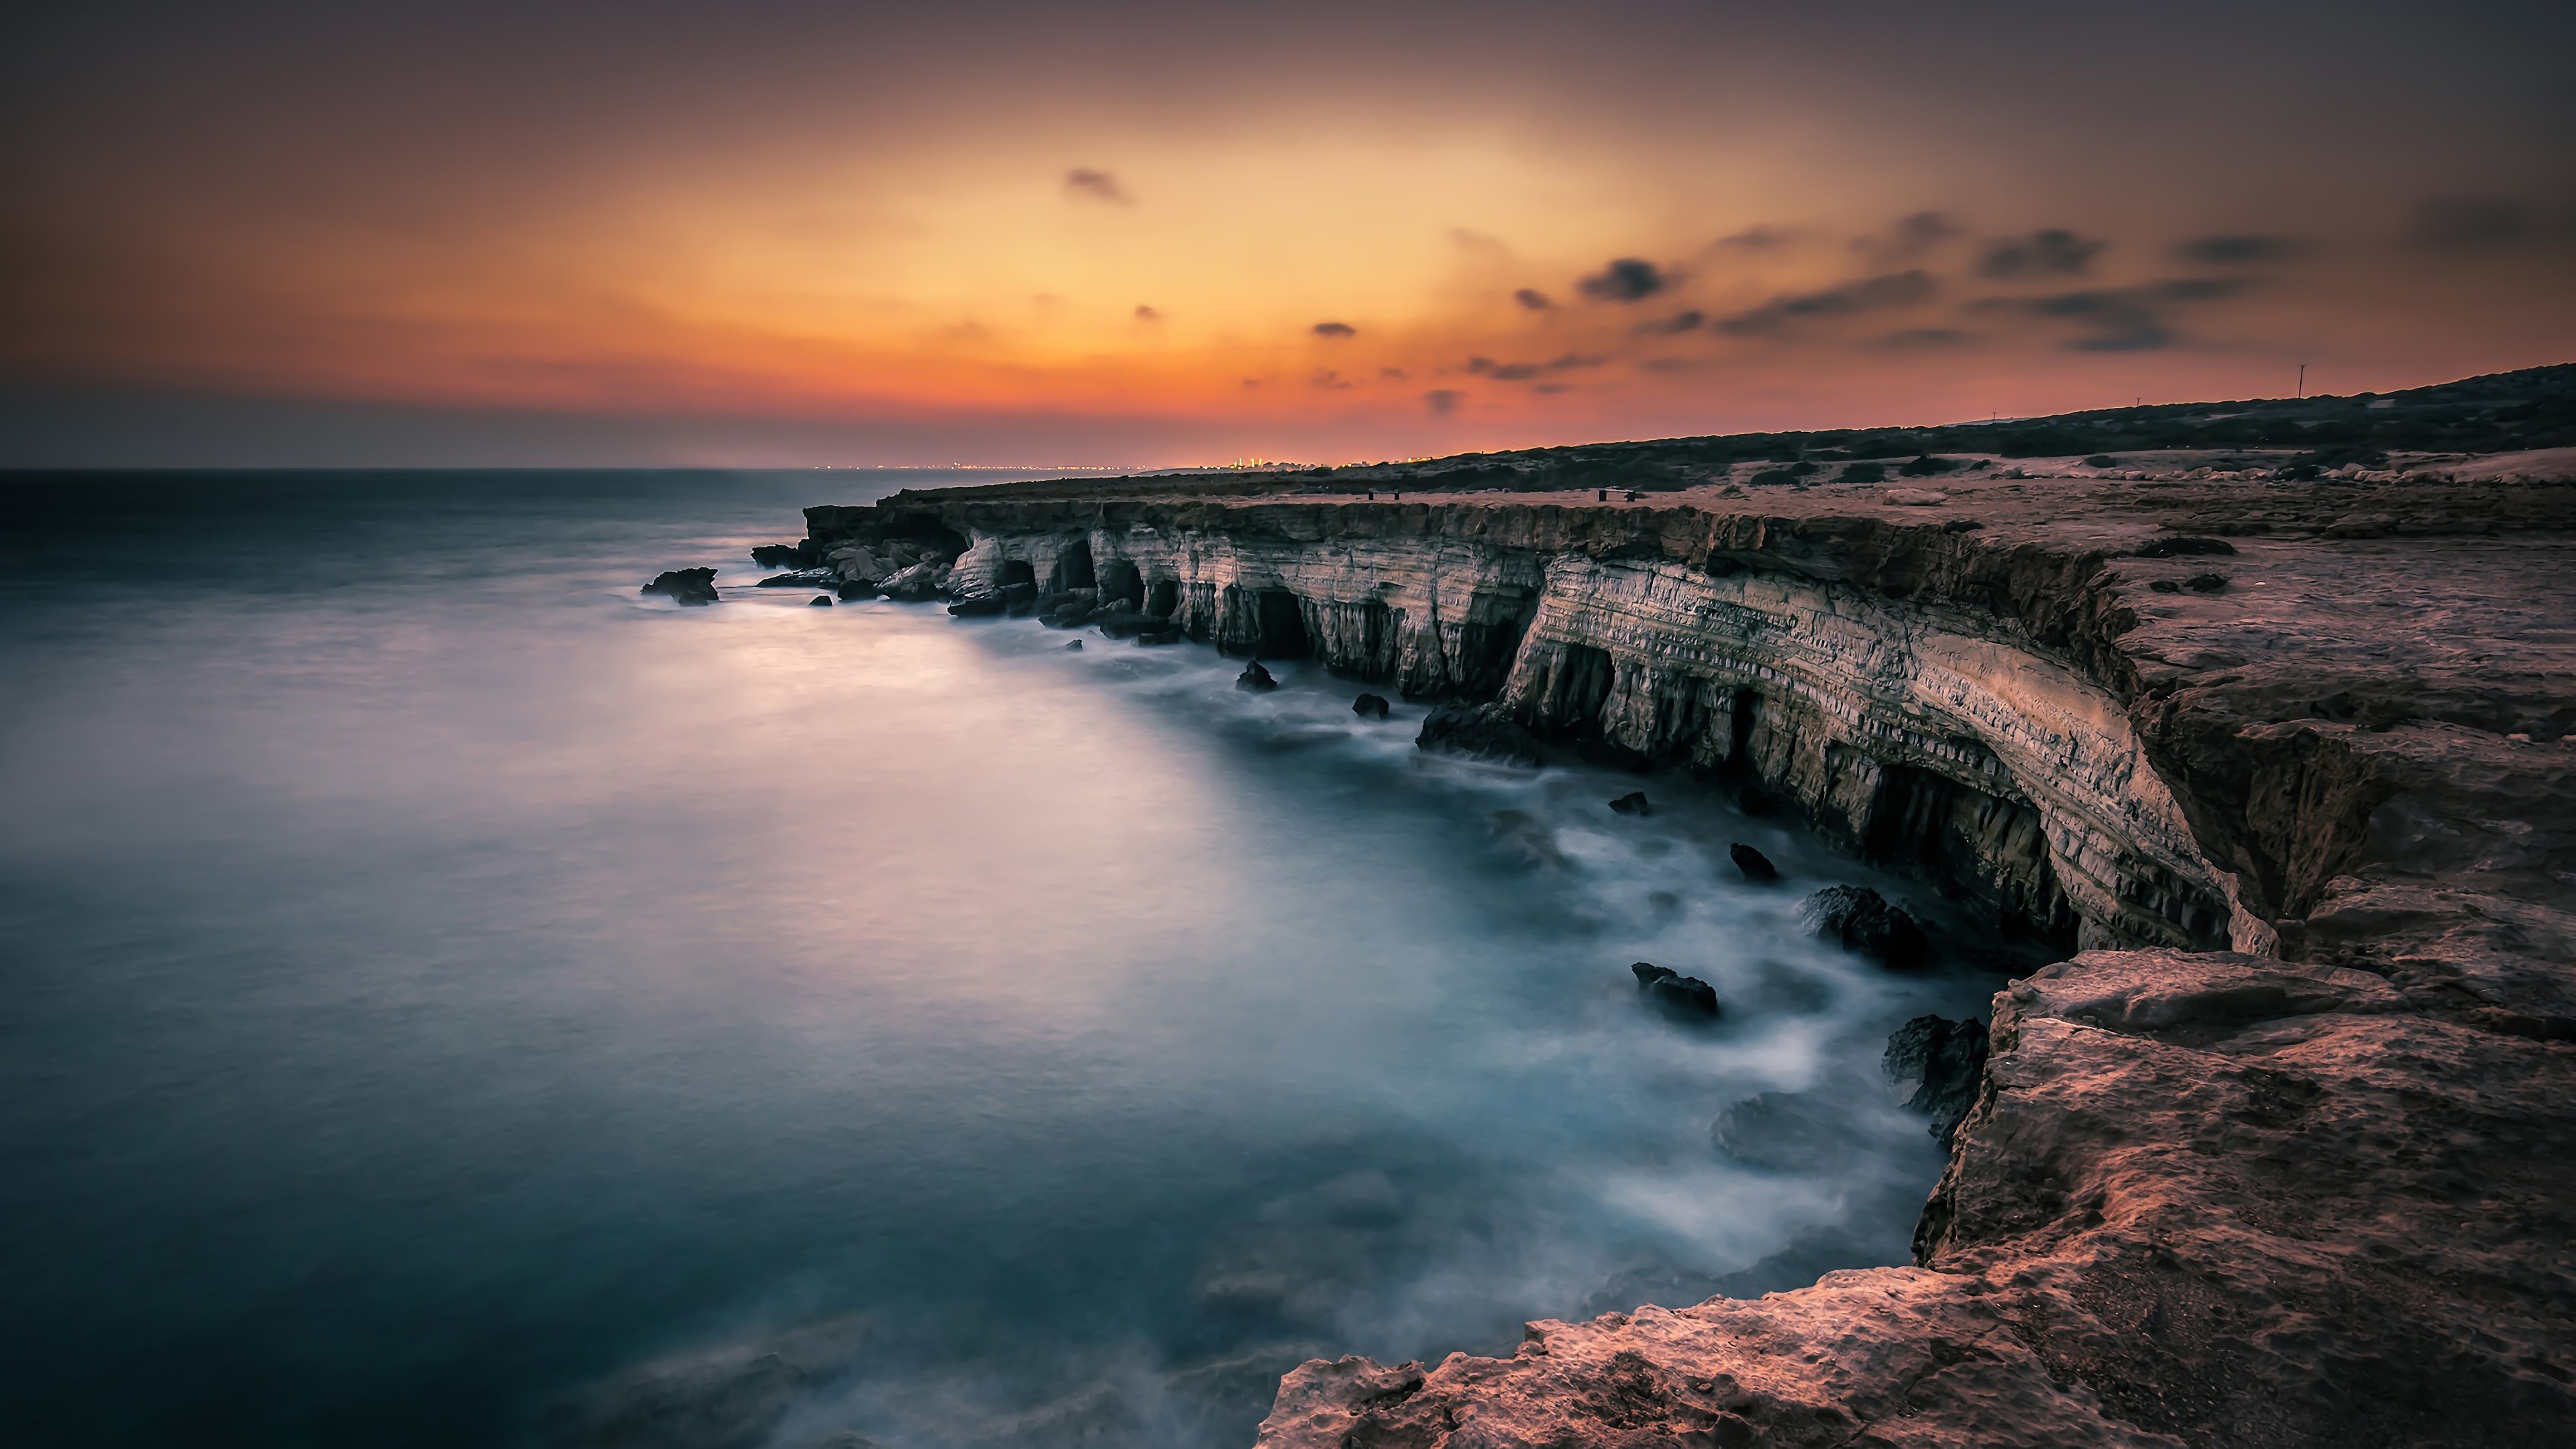 Seascape: An amazing sunset at the beach of Cyprus, Foggy water surface, Sheer cliffs. 3840x2160 4K Wallpaper.